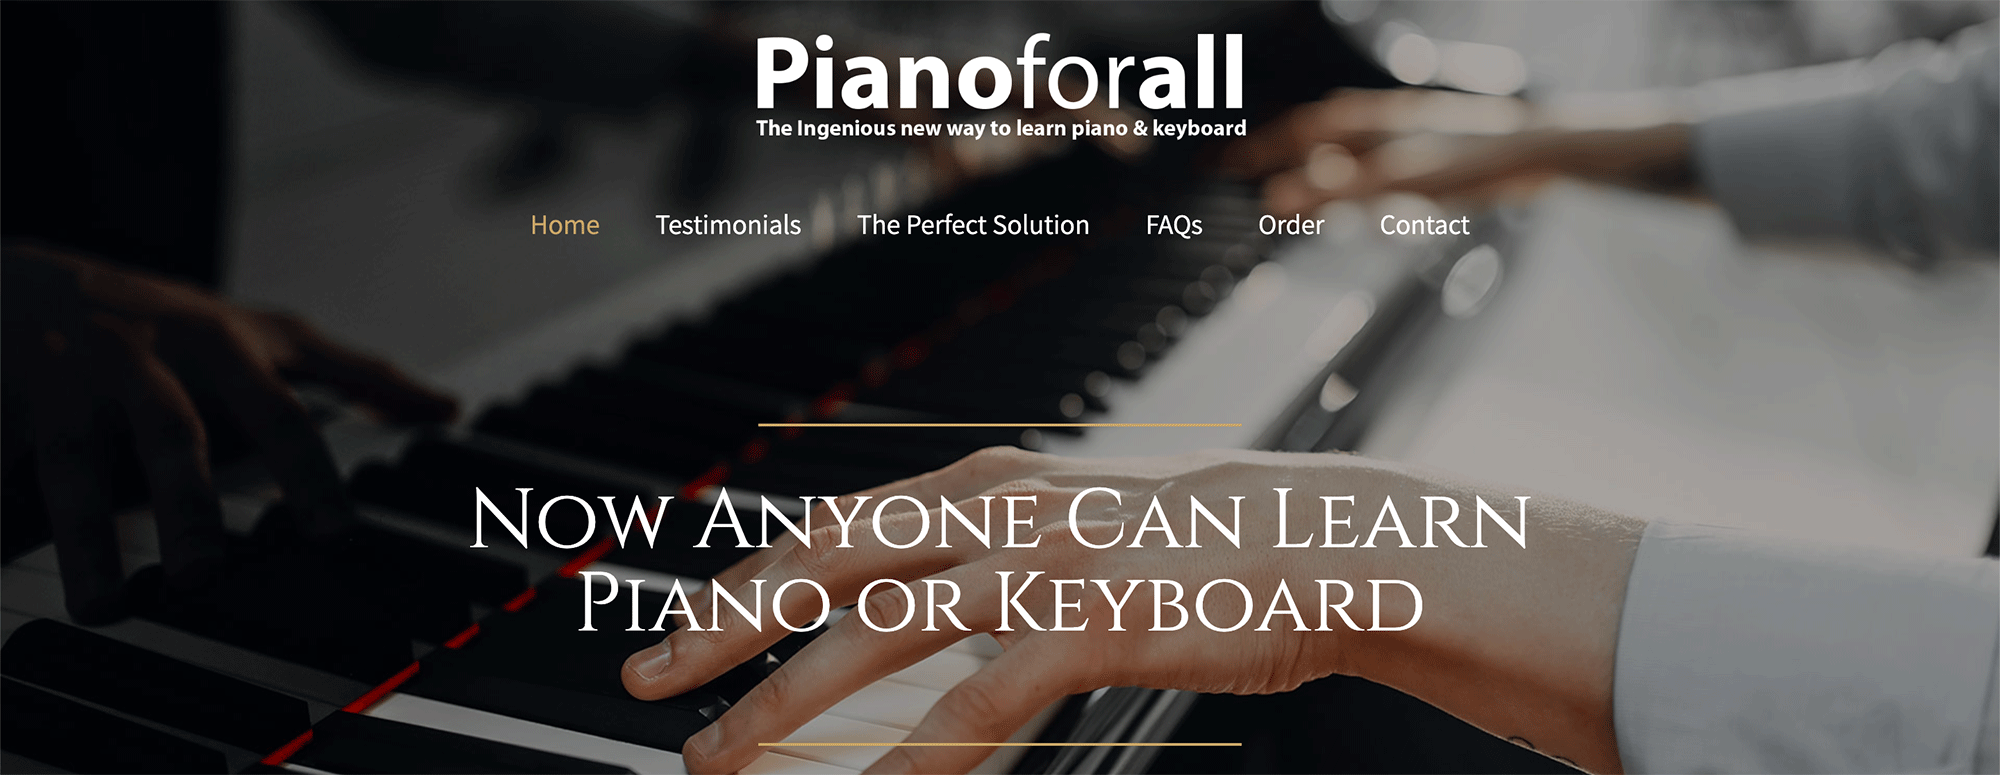 Learning to play the piano with Piano For All is a great way to enhance your music production skills